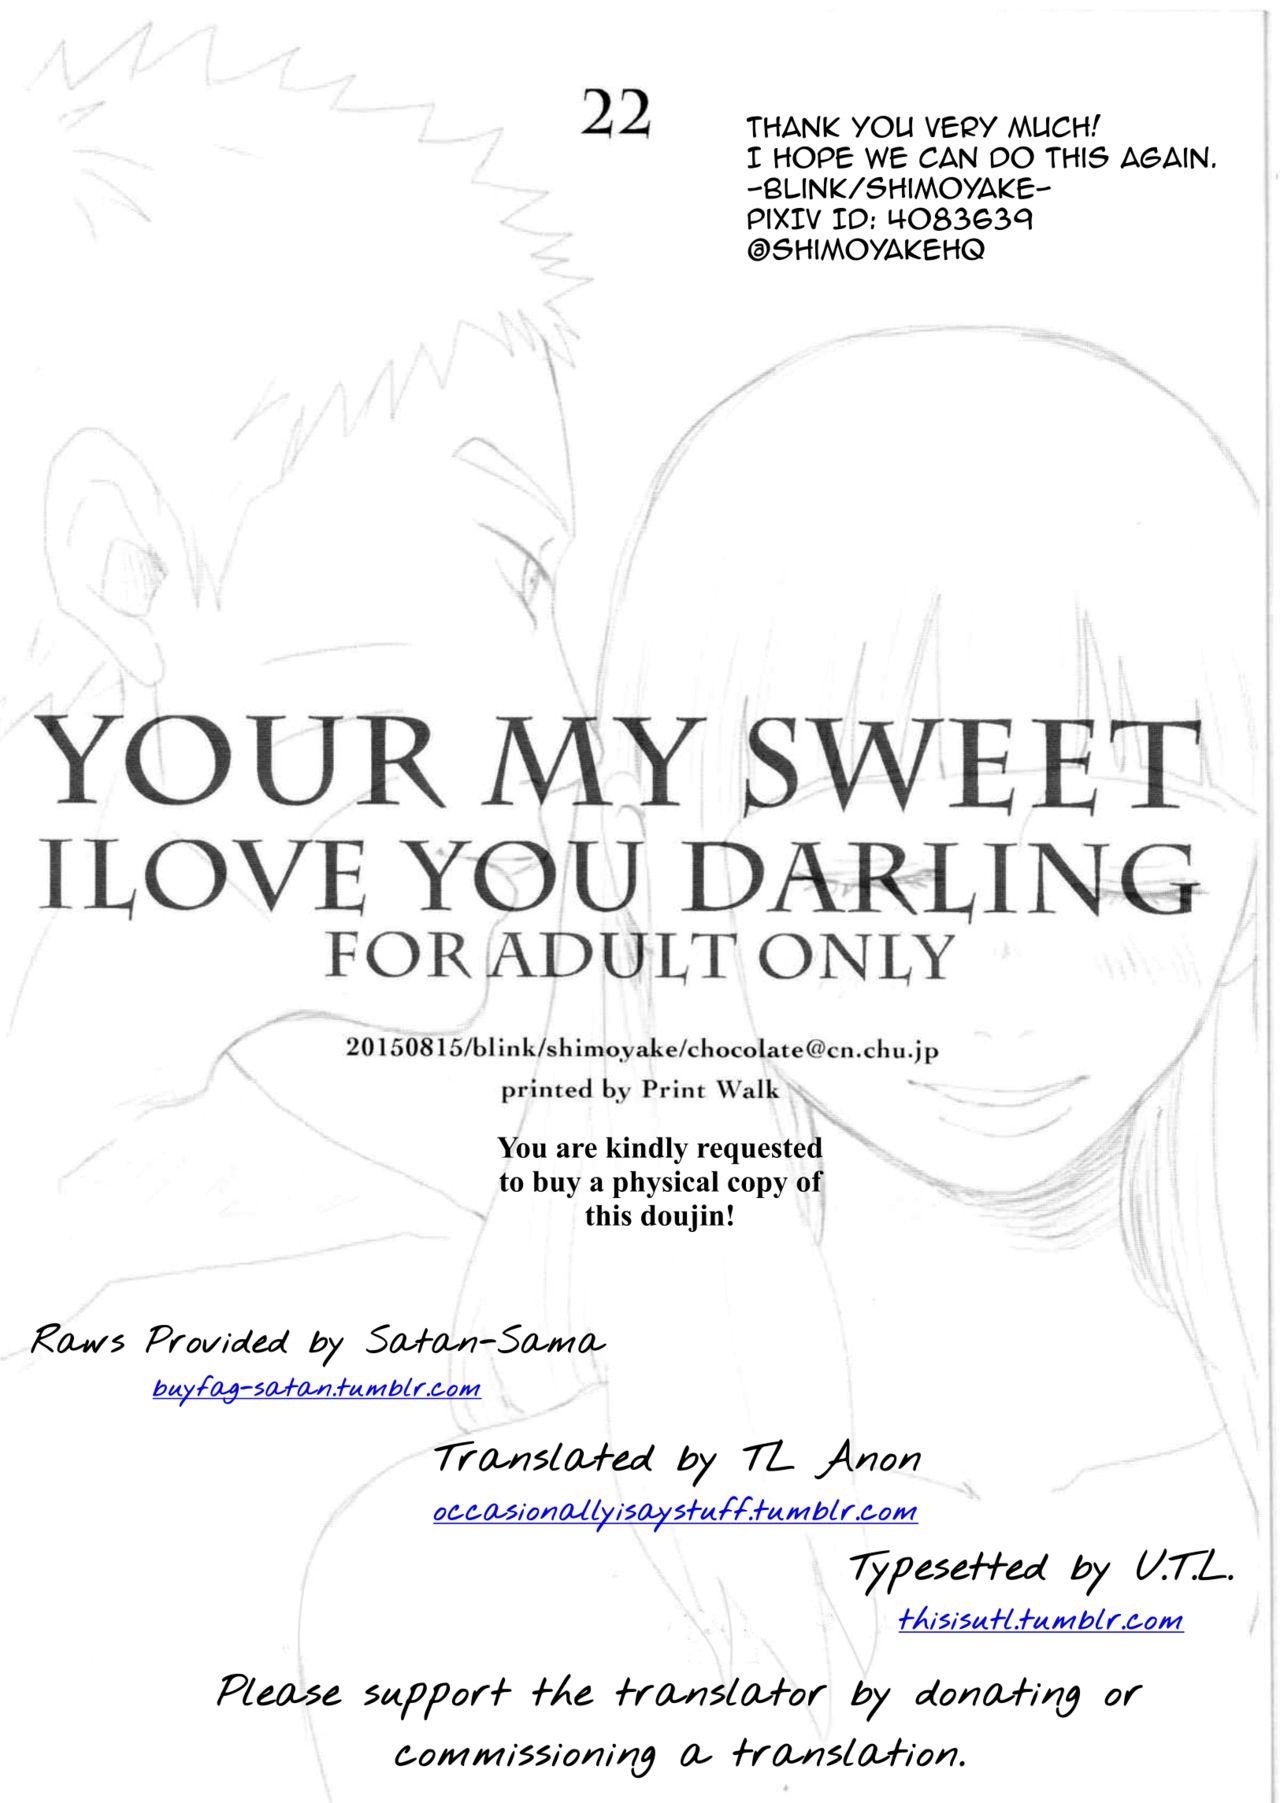 YOUR MY SWEET - I LOVE YOU DARLING 22